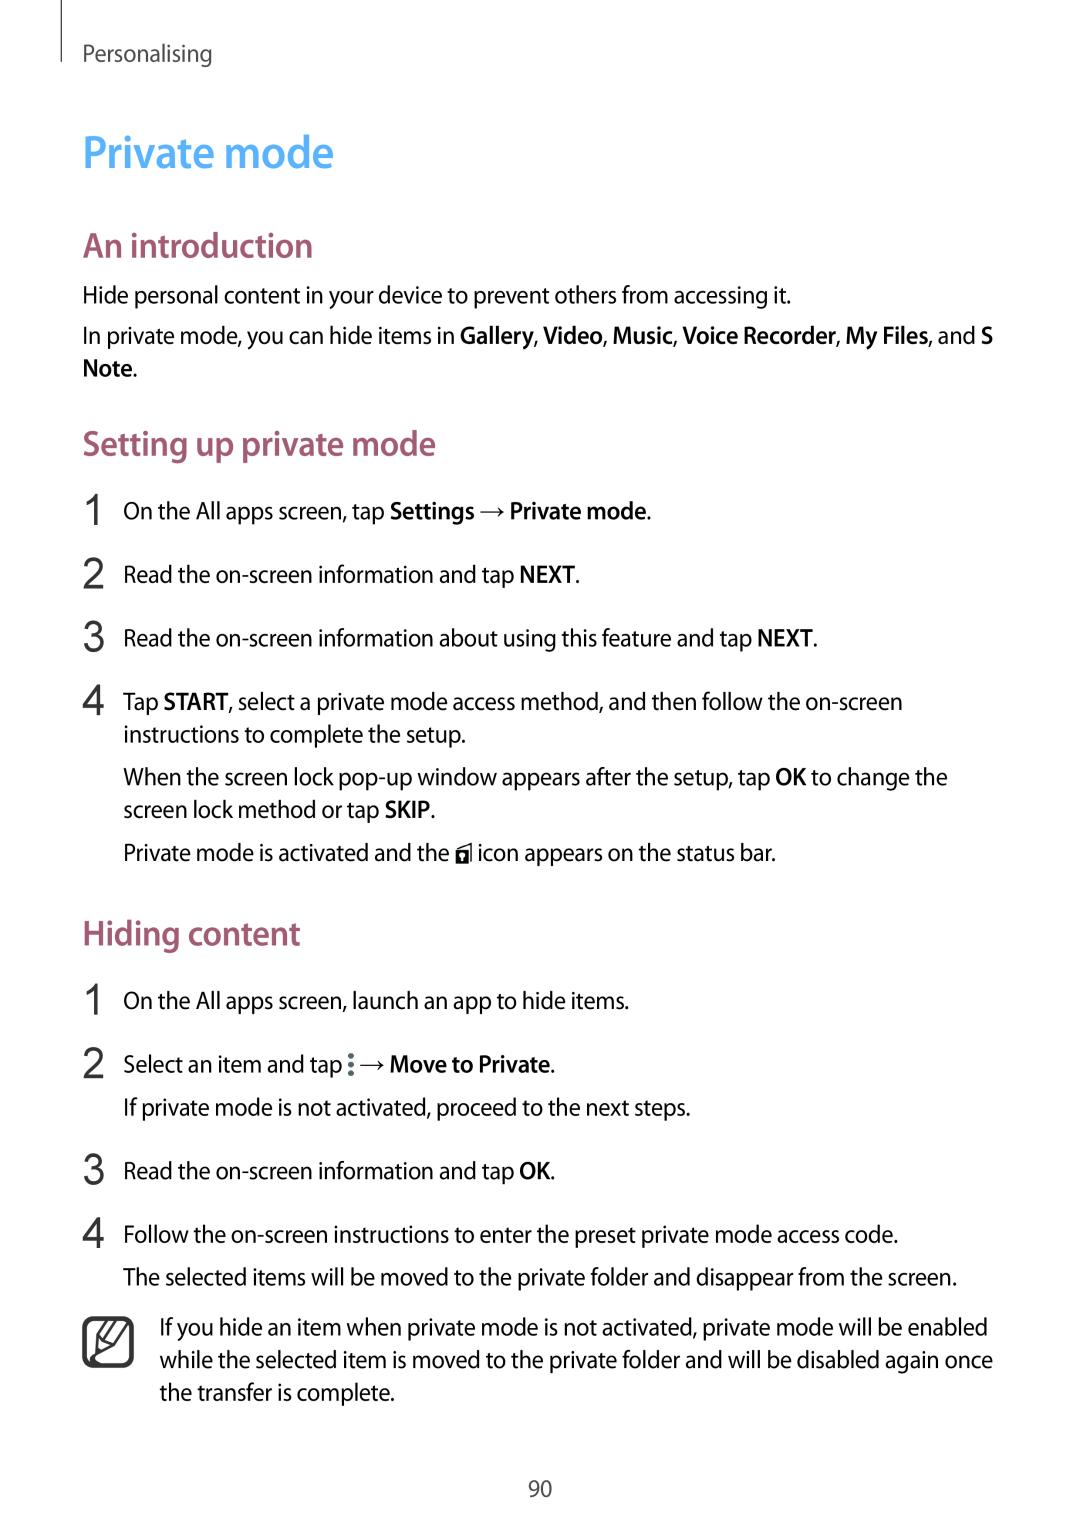 Samsung SM-N915FZWYSEB manual Private mode, Setting up private mode, Hiding content, An introduction, Personalising 